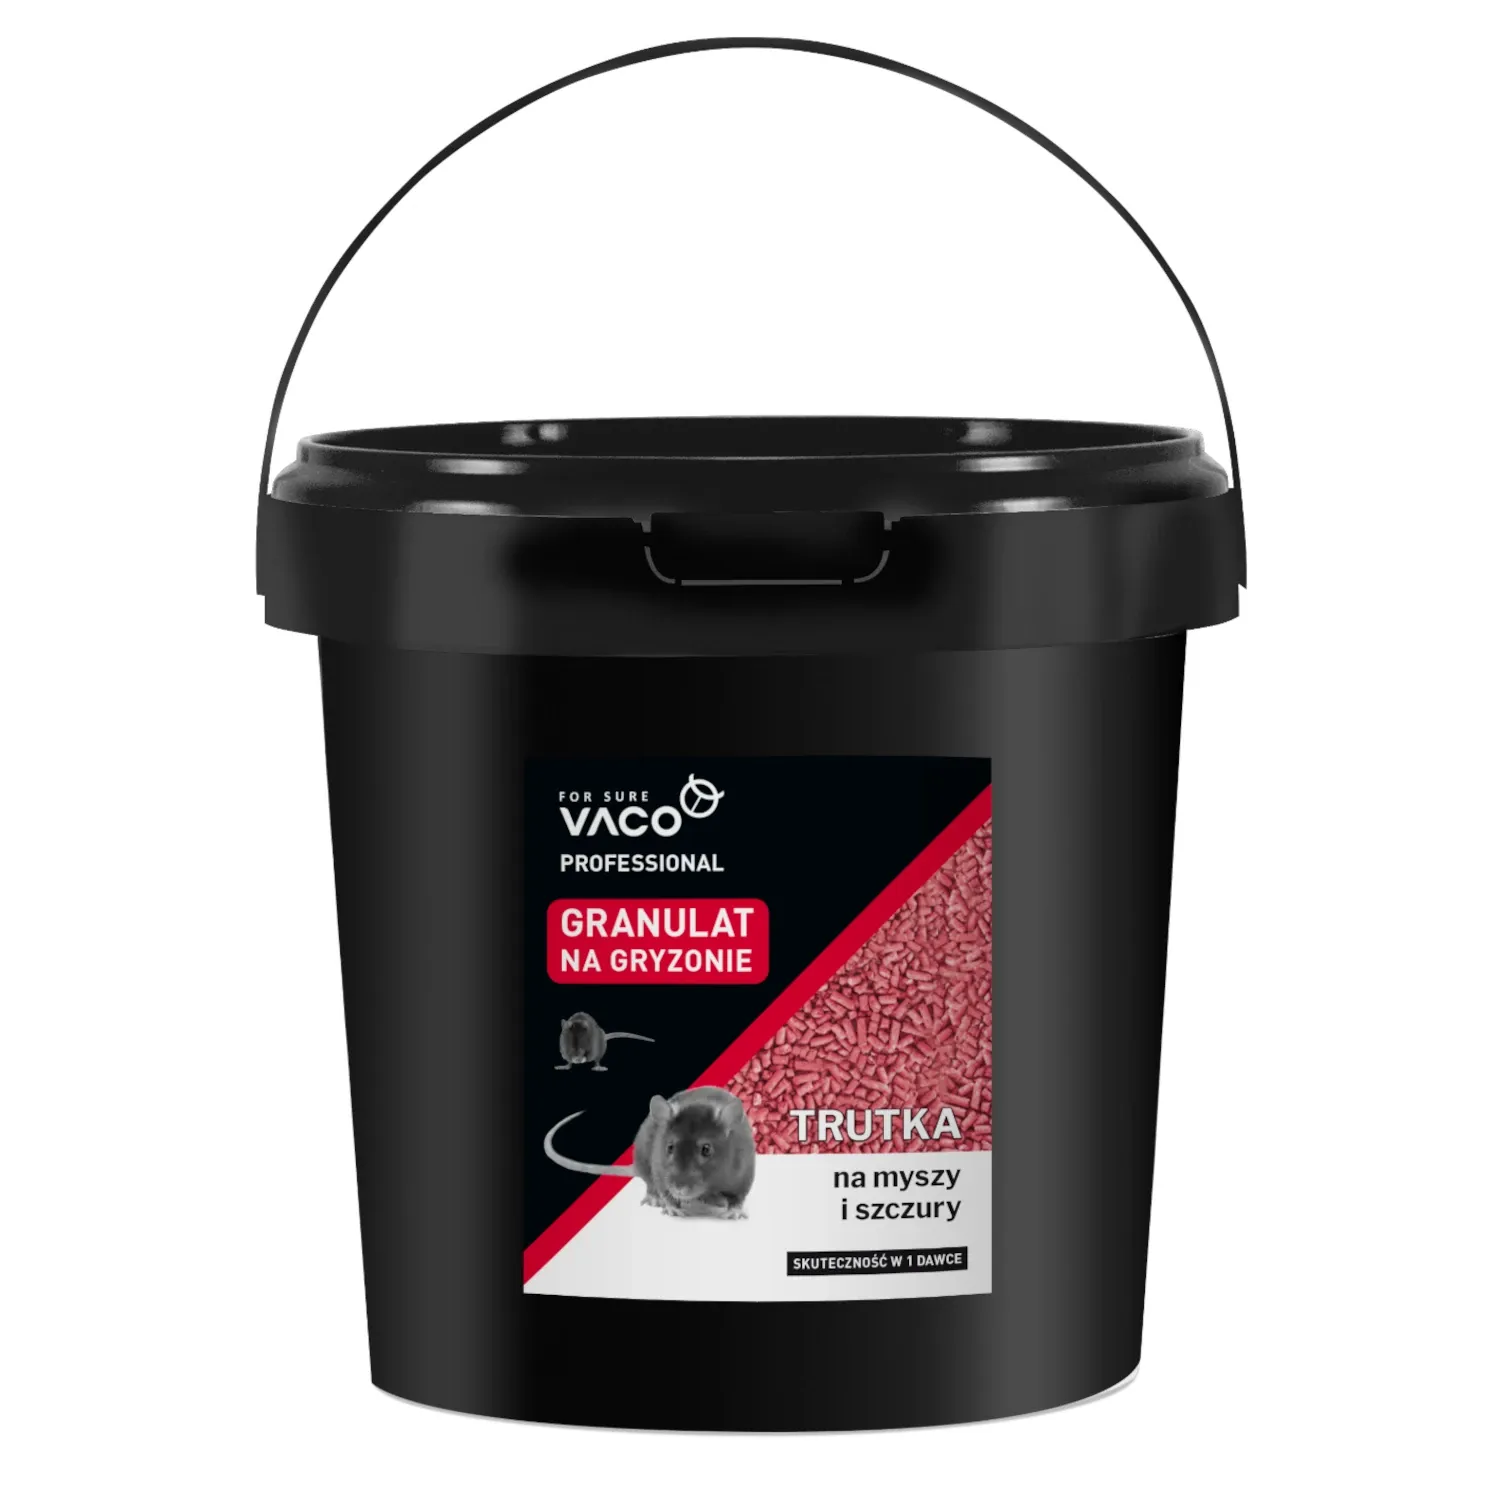 VACO PROFESSIONAL GRANULES FOR MICE AND RATS (BUCKET) 3 KG